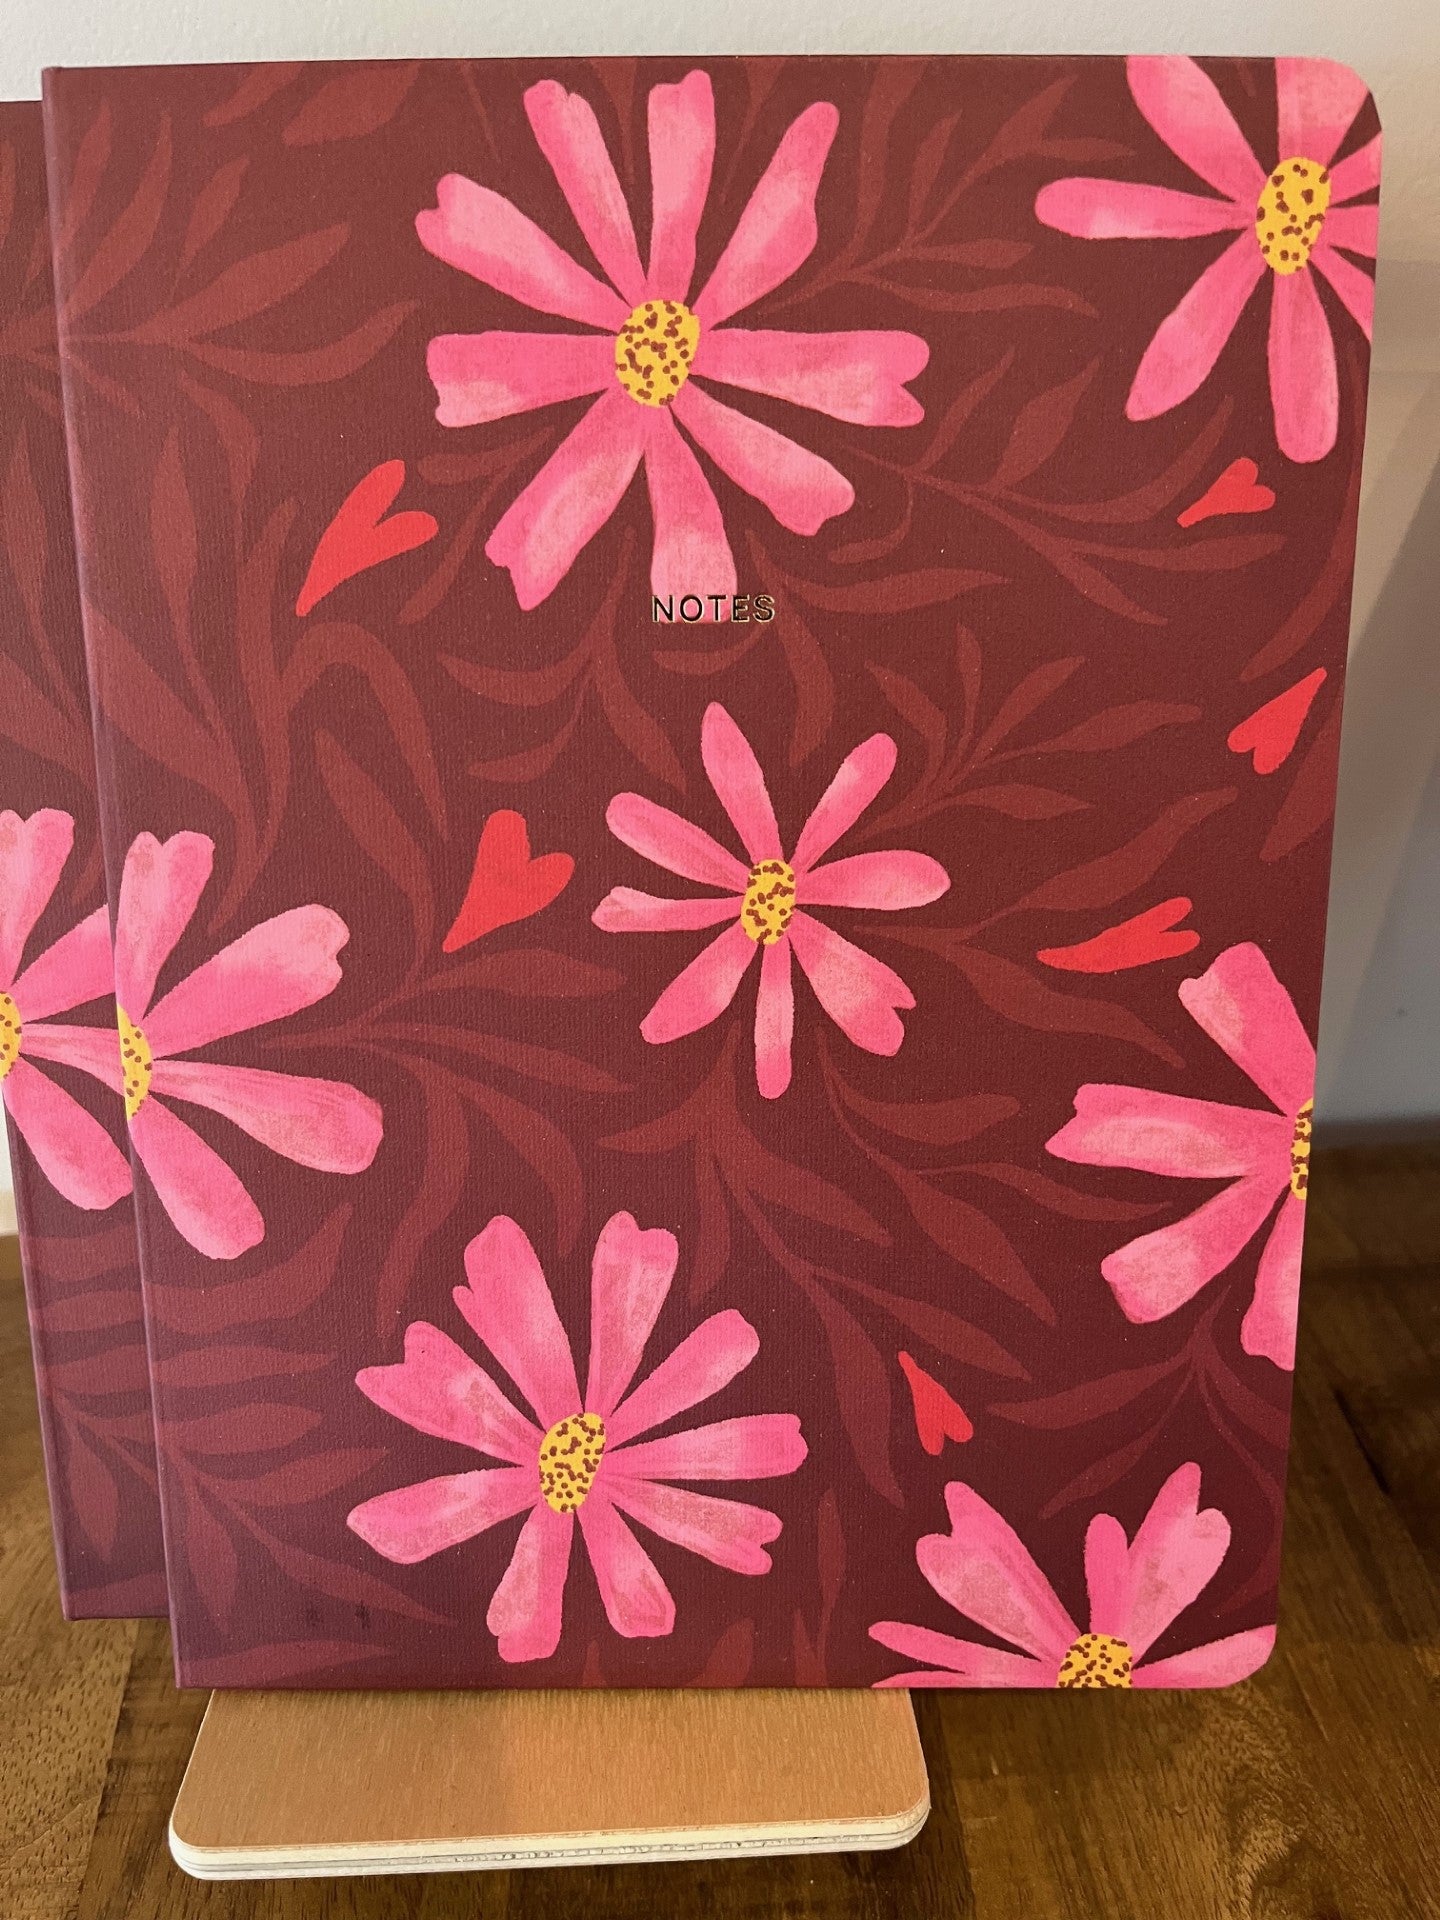 "Mother's Day" Gift Box with Journal